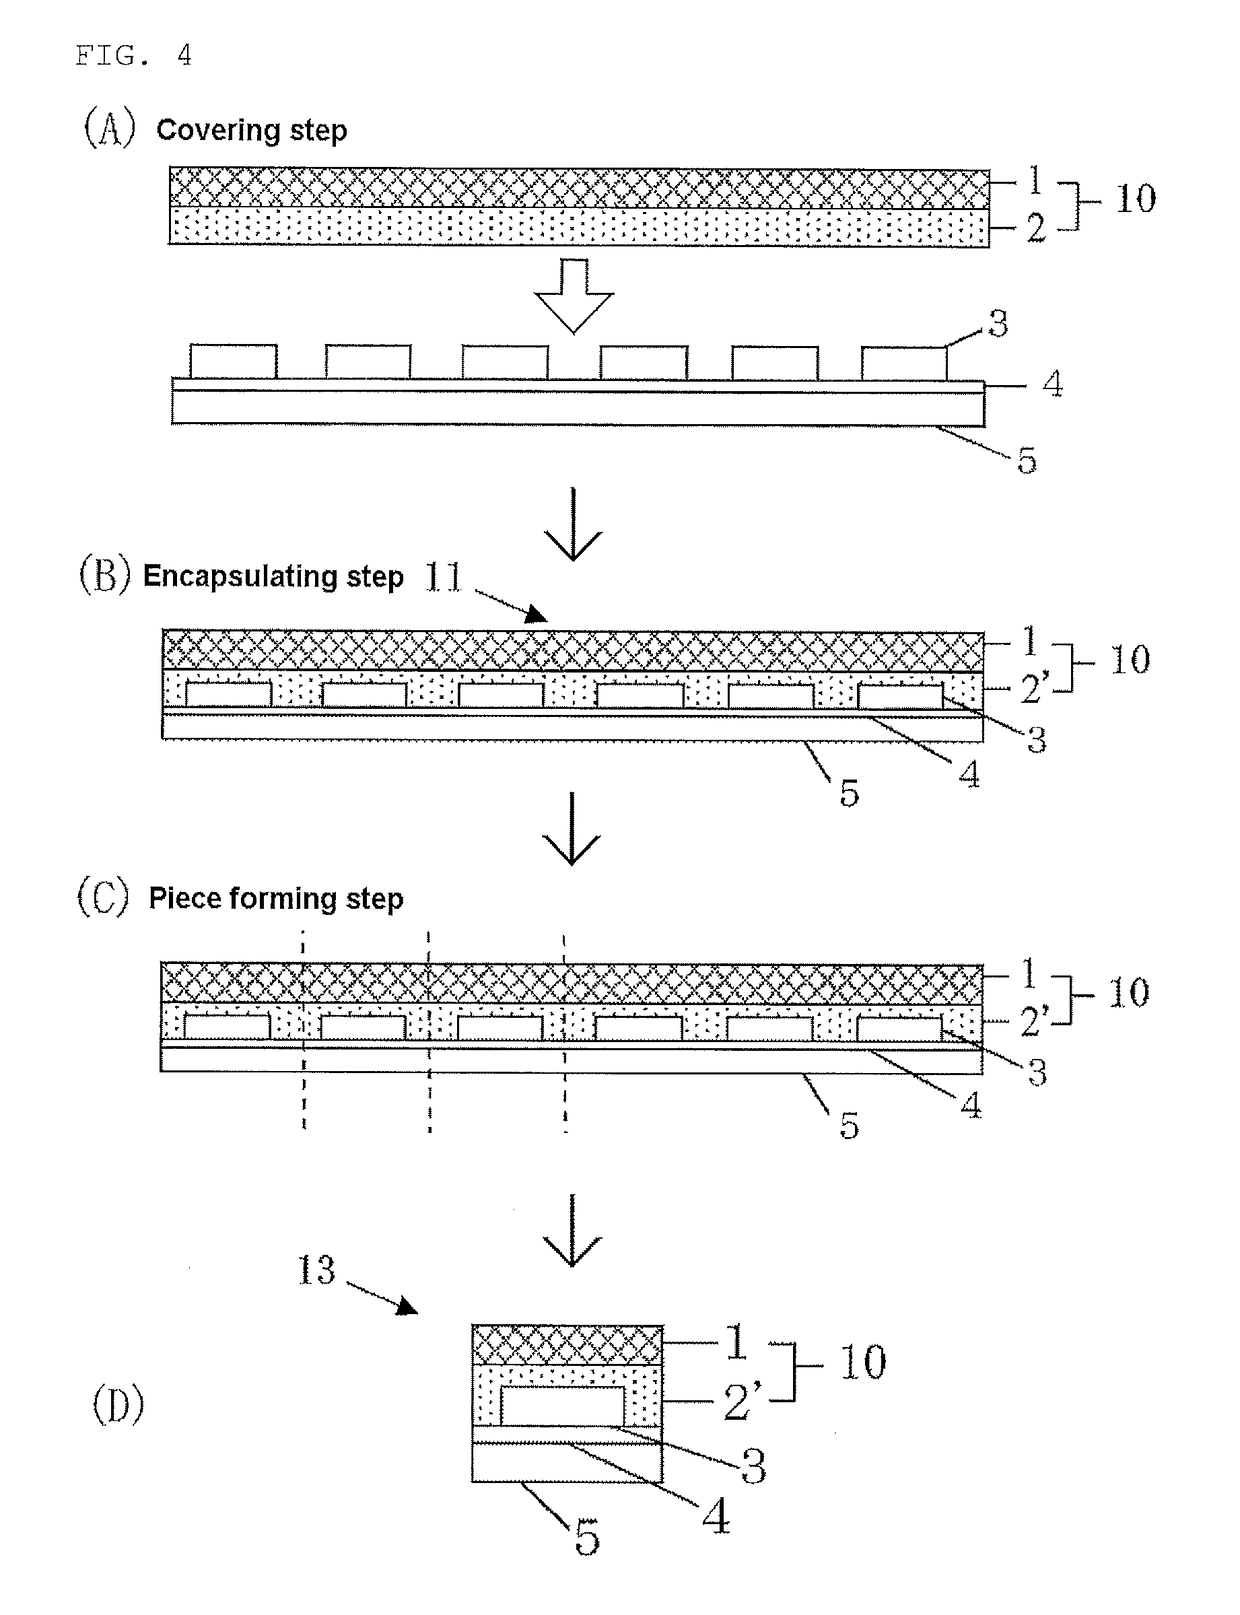 Electromagnetic wave shielding support base-attached encapsulant, encapsulated substrate having semicondutor devices mounted thereon, encapsulated wafer having semiconductor devices formed thereon, and semiconductor apparatus